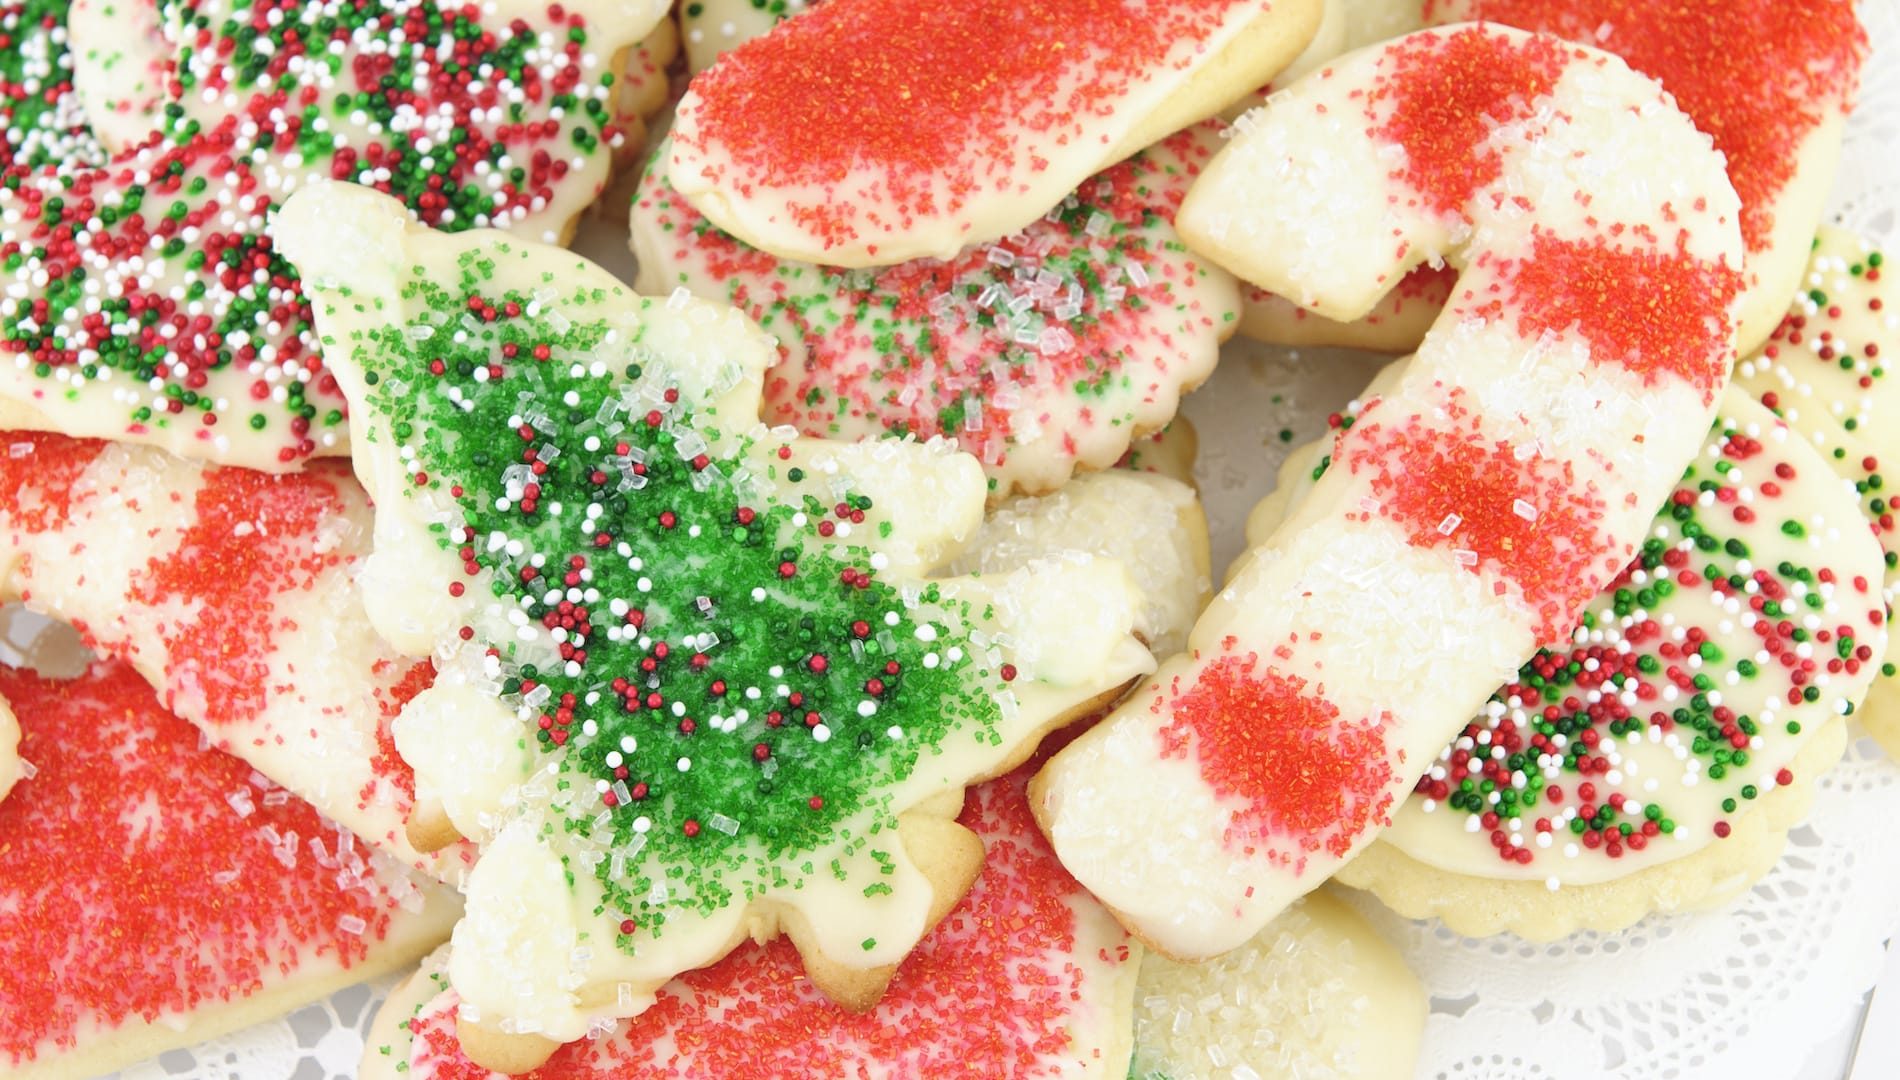 A plate of decorated Christmas sugar cookies